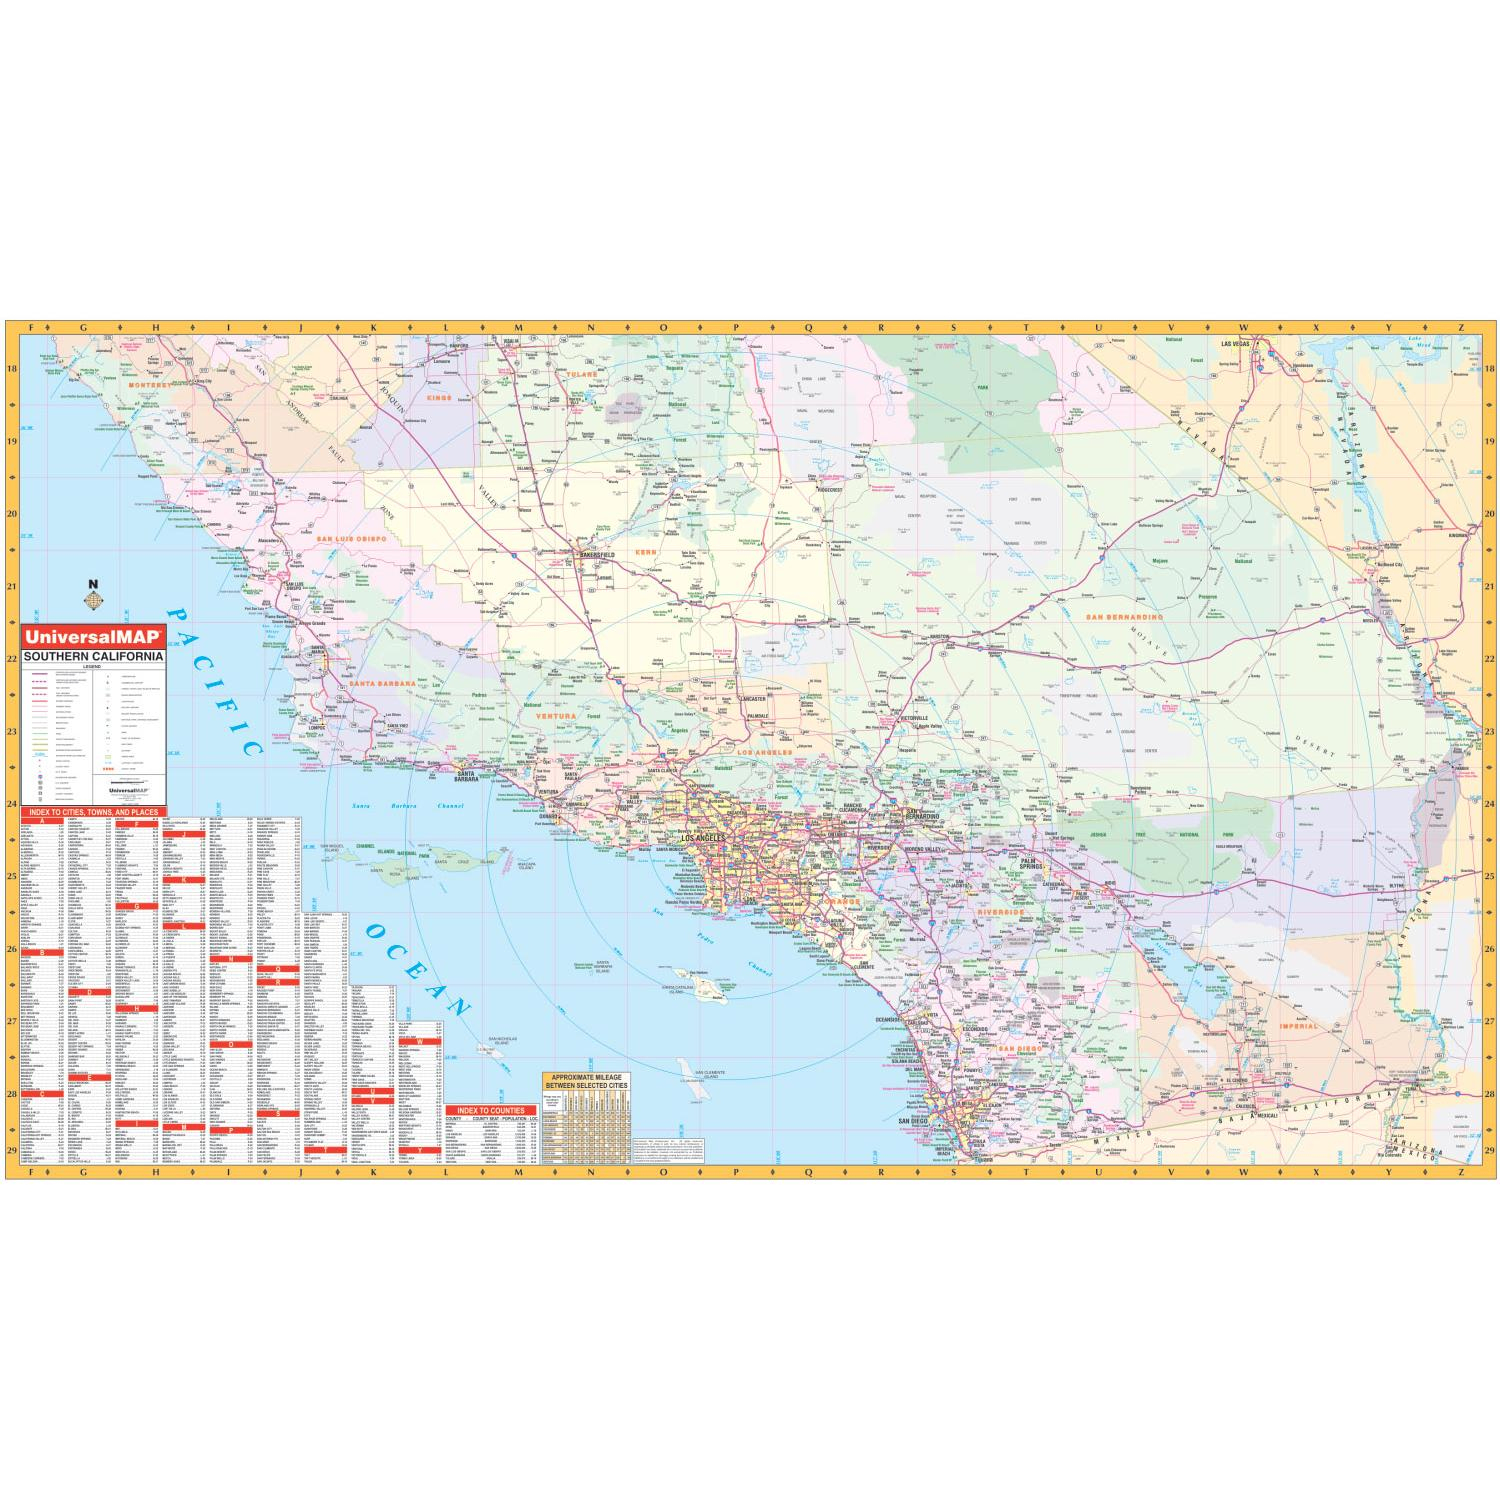 California State Southern Wall Map - The Map Shop - Southern California Wall Map